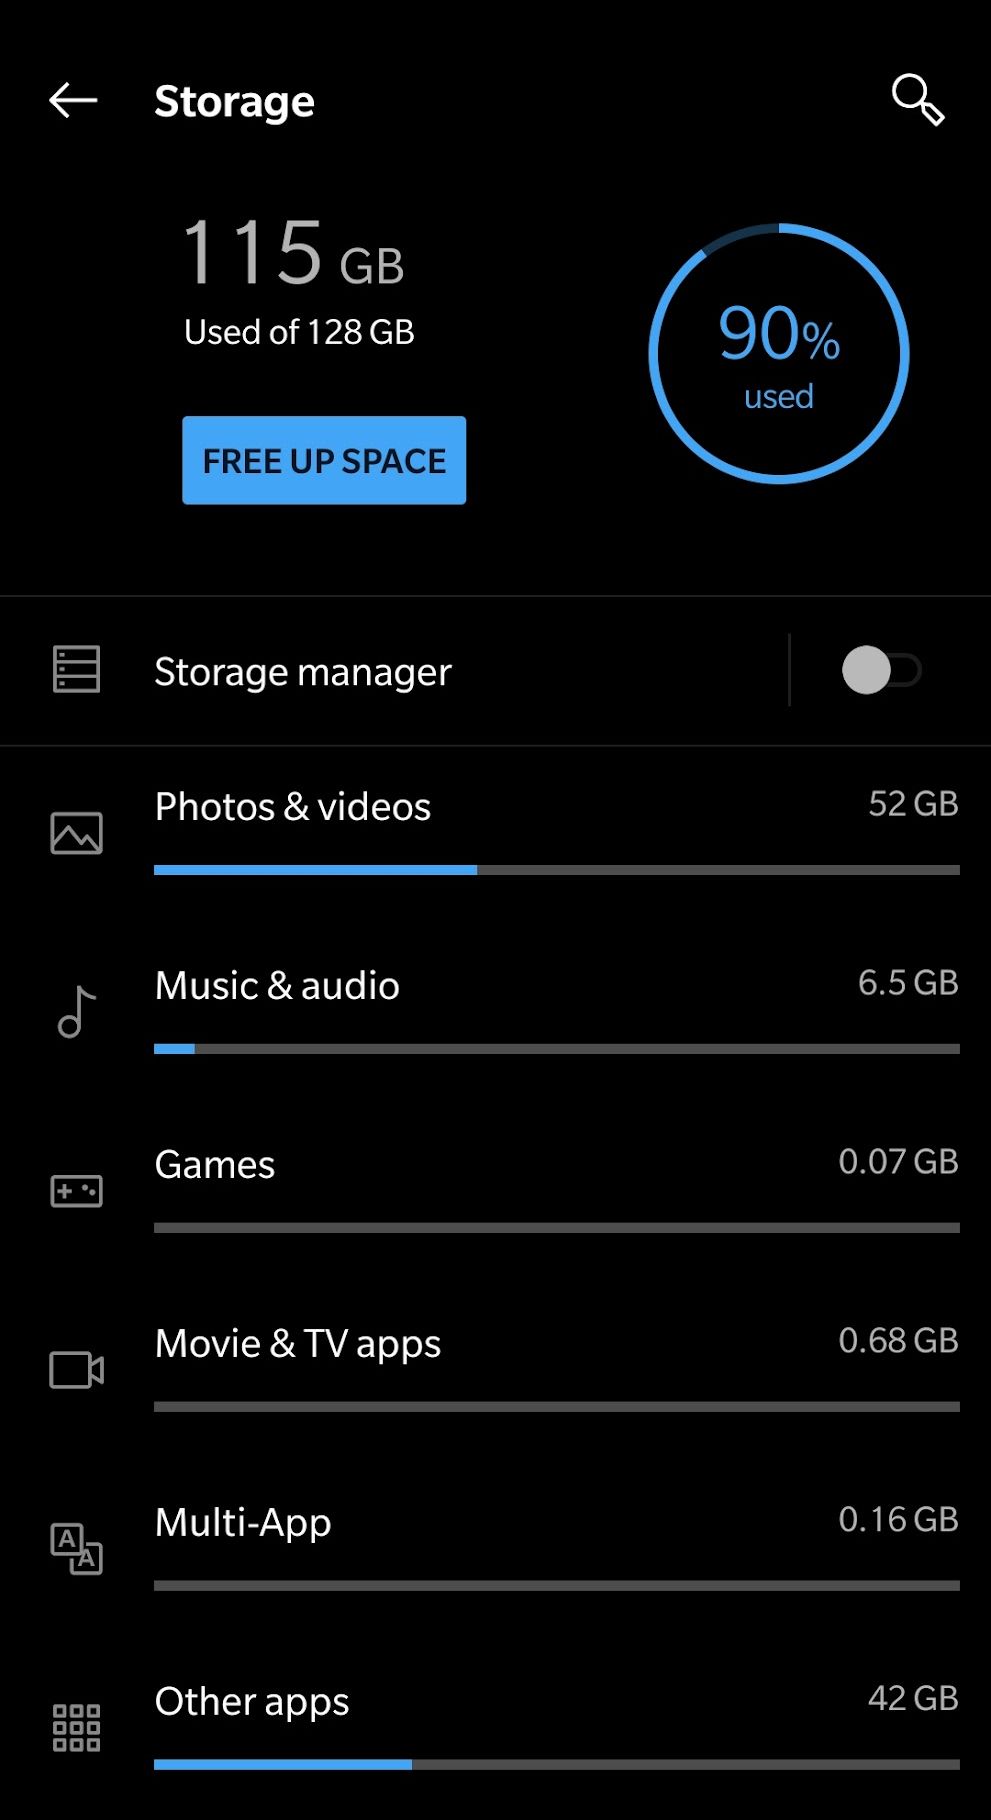 Storage overview on Android phone